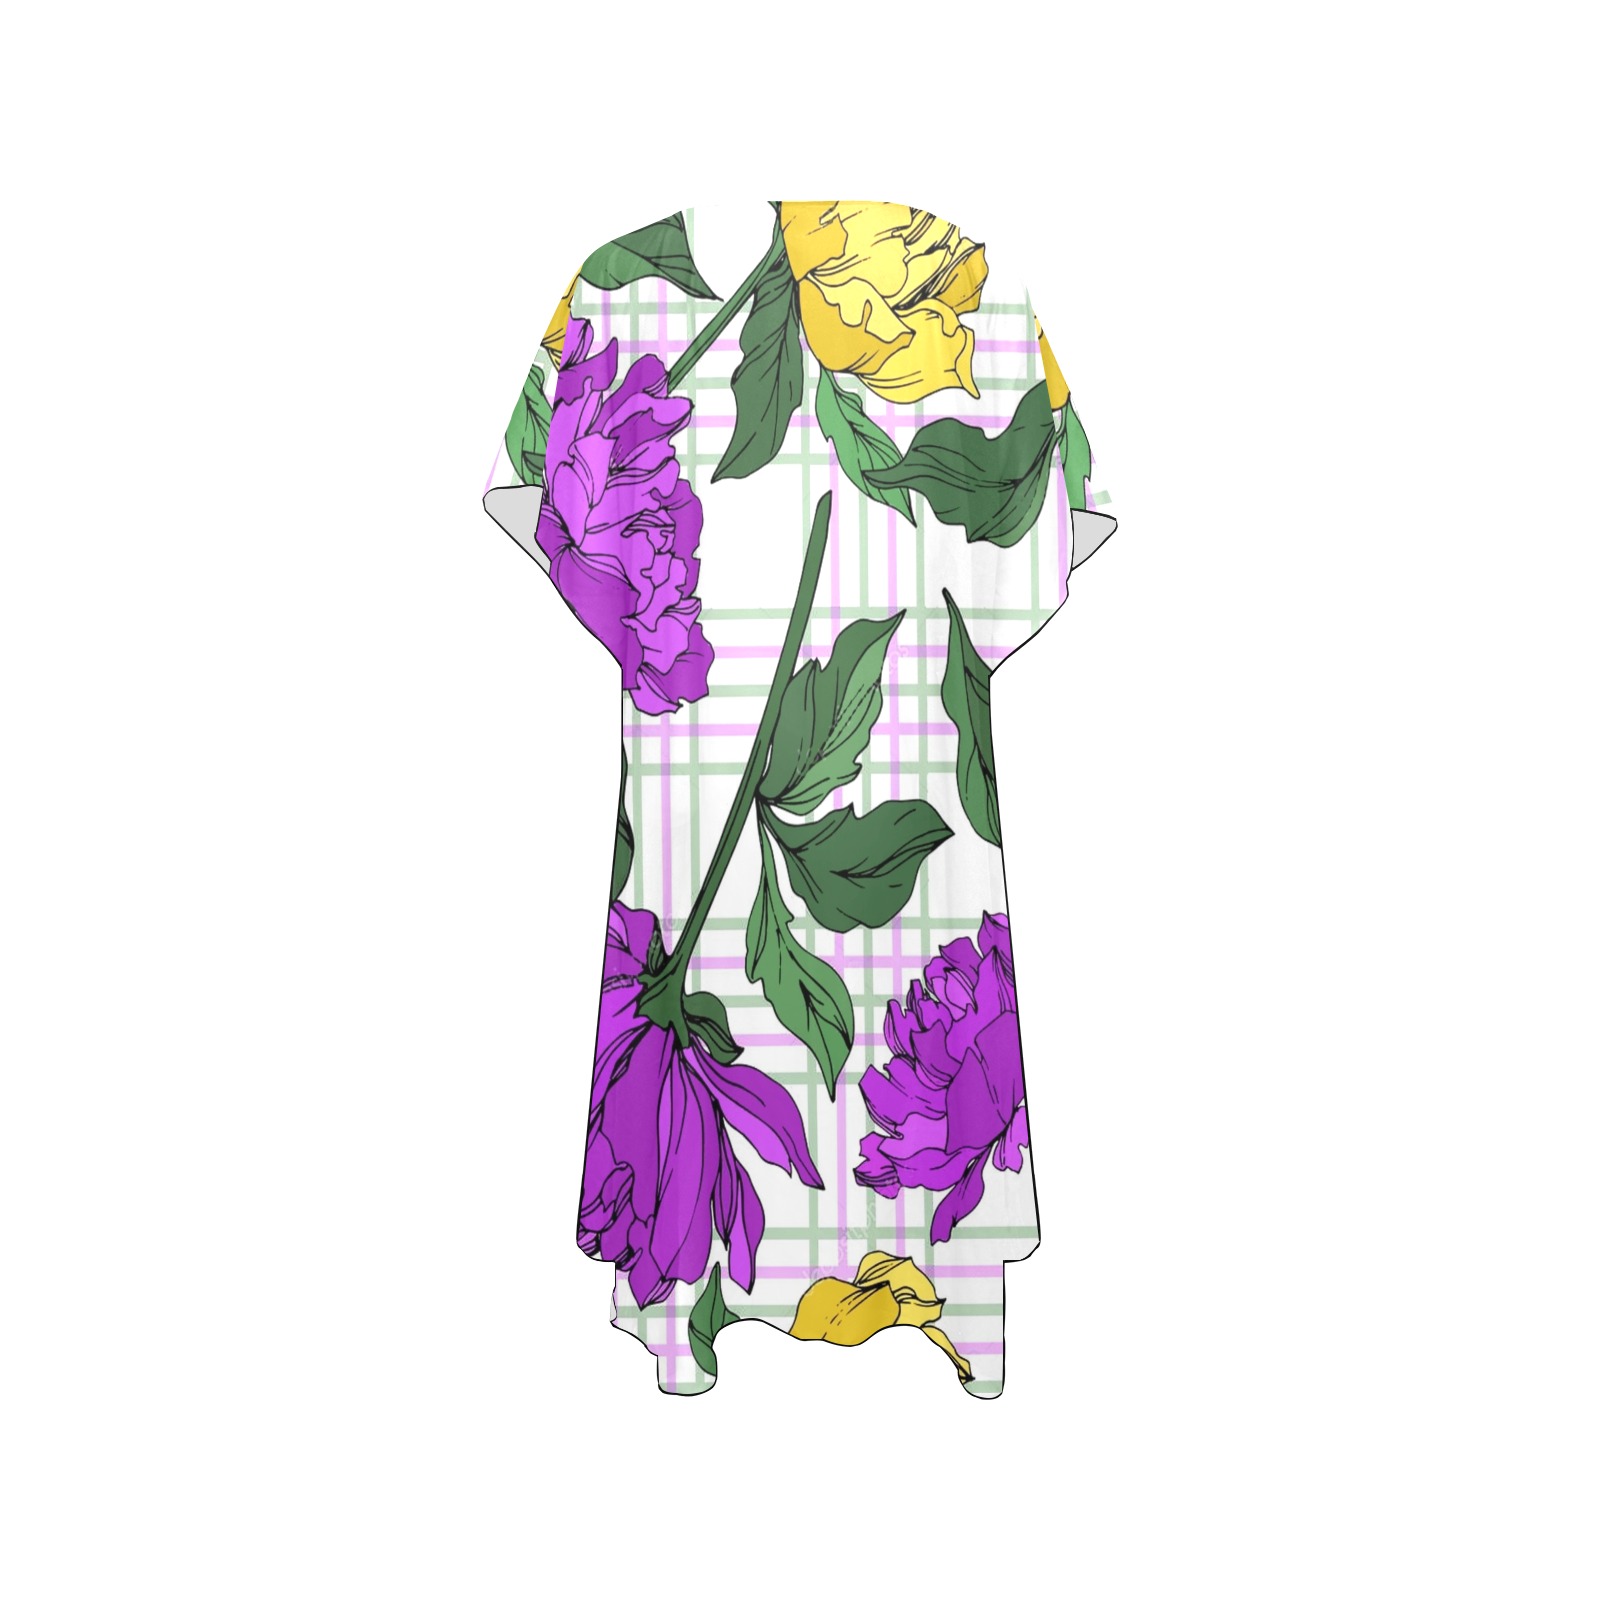 Multicolored-Peony Flowers & Leaves Mid-Length Side Slits Chiffon Cover Ups (Model H50)